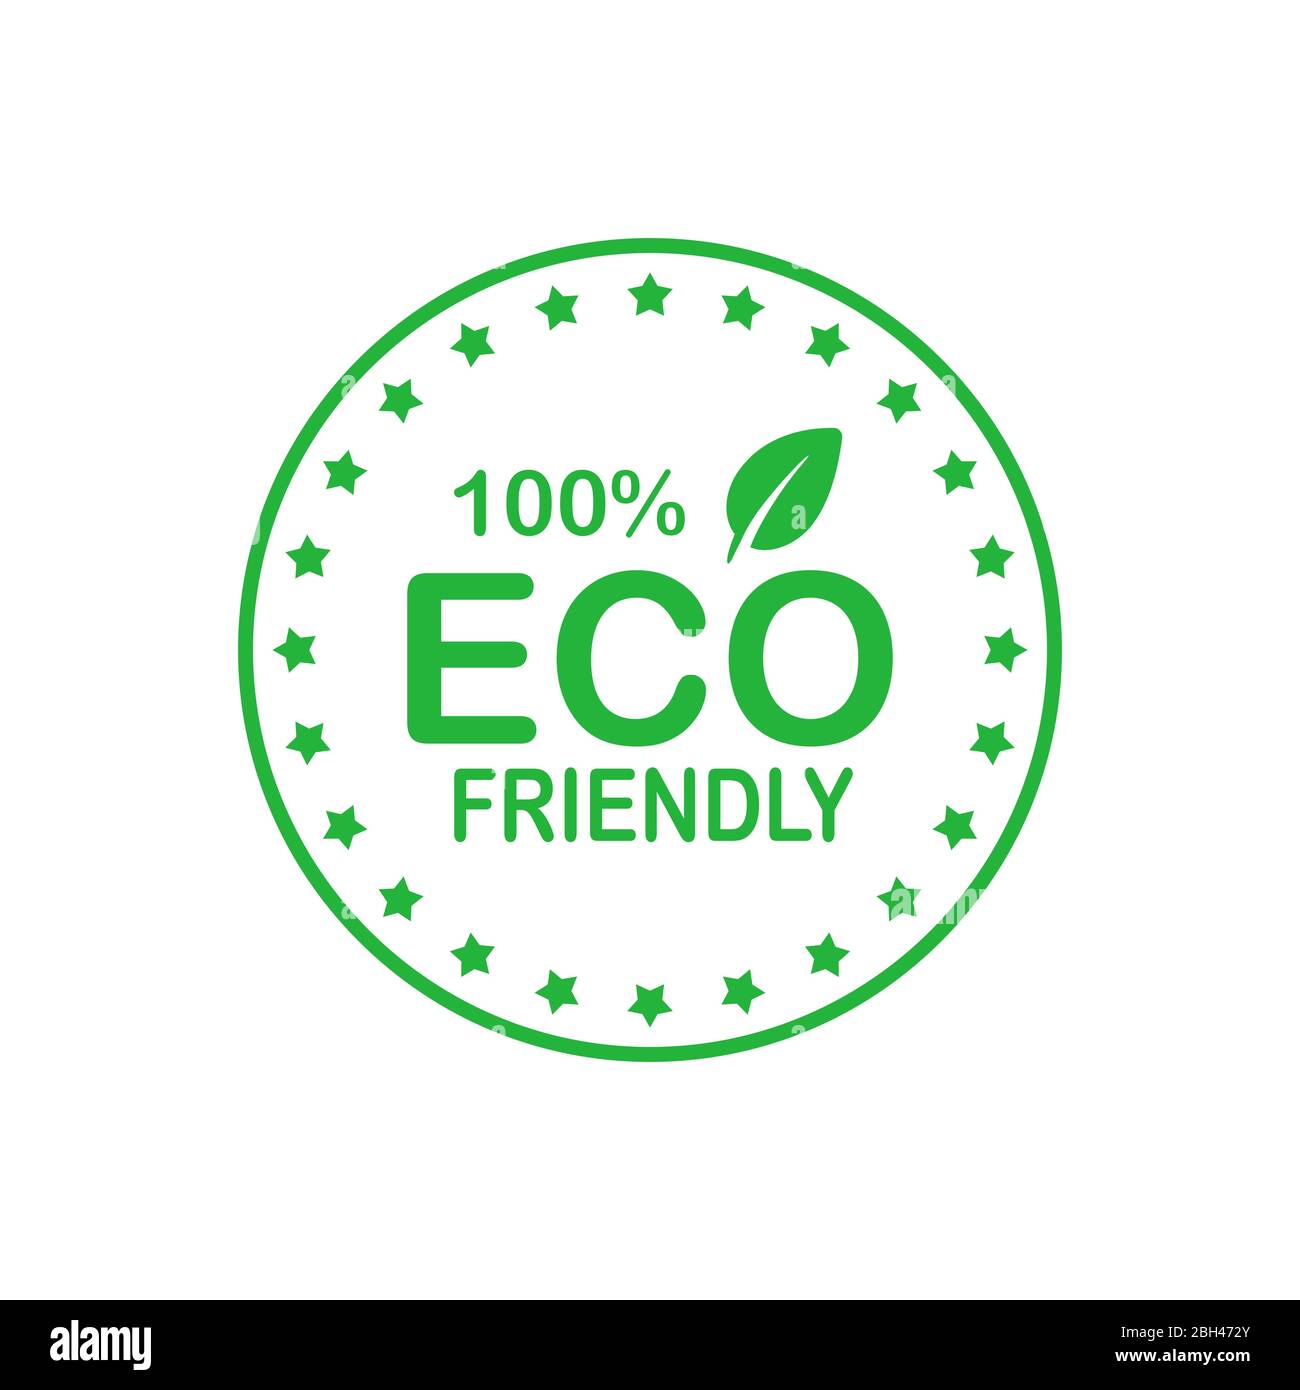 Eco friendly 100 percent green circle badge with leaf. Design element for packaging design and promotional material. Vector illustration. Stock Vector